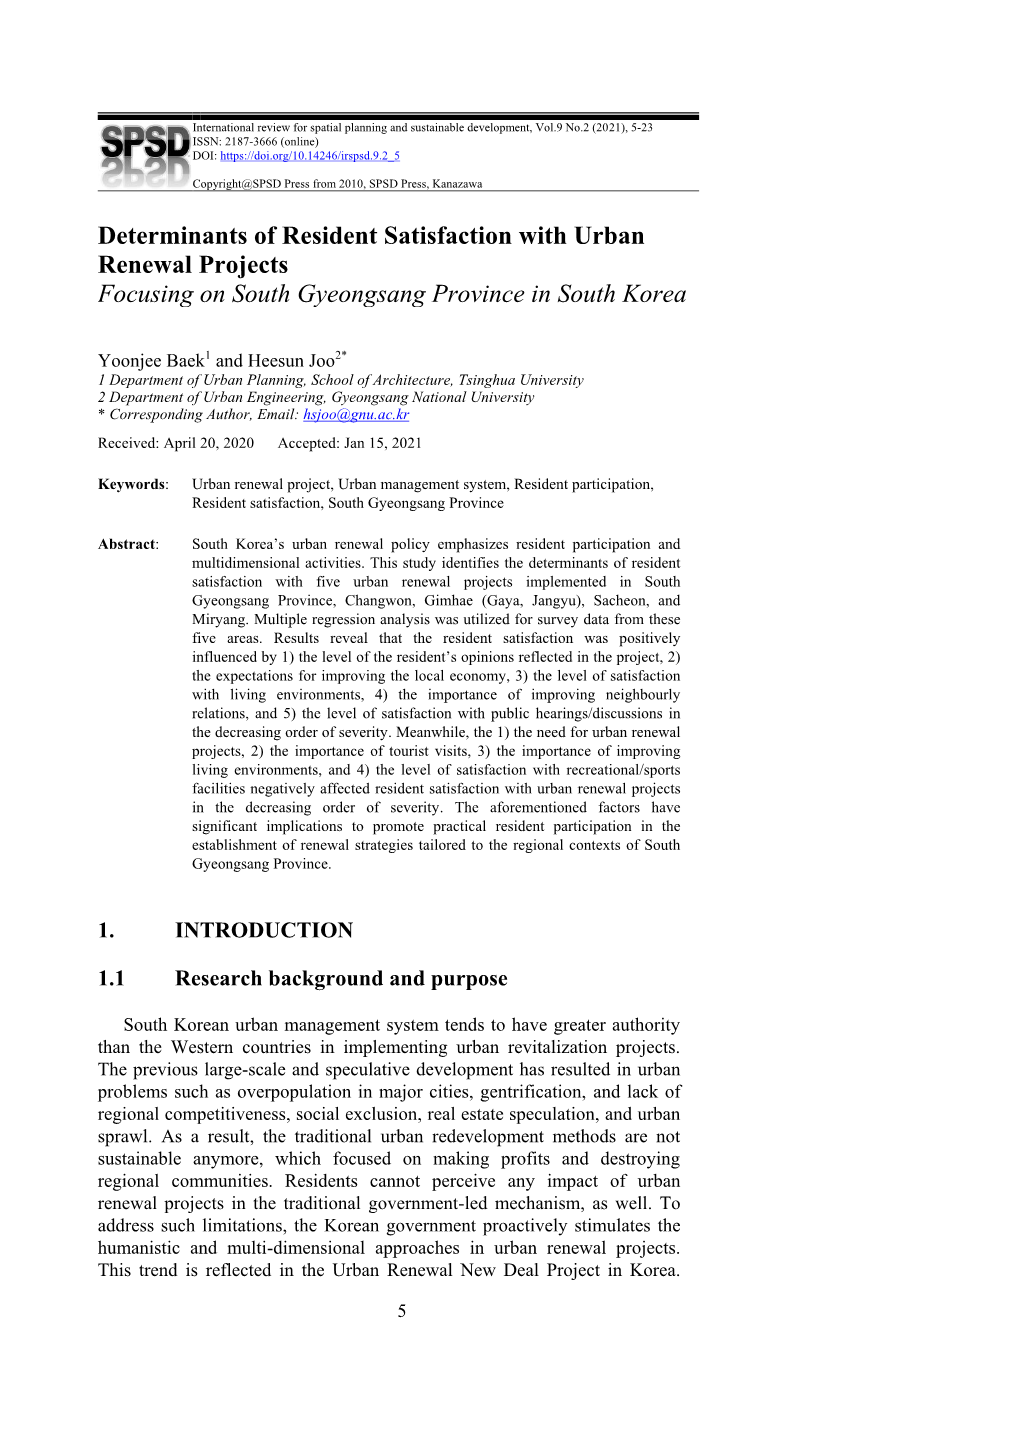 Determinants of Resident Satisfaction with Urban Renewal Projects Focusing on South Gyeongsang Province in South Korea